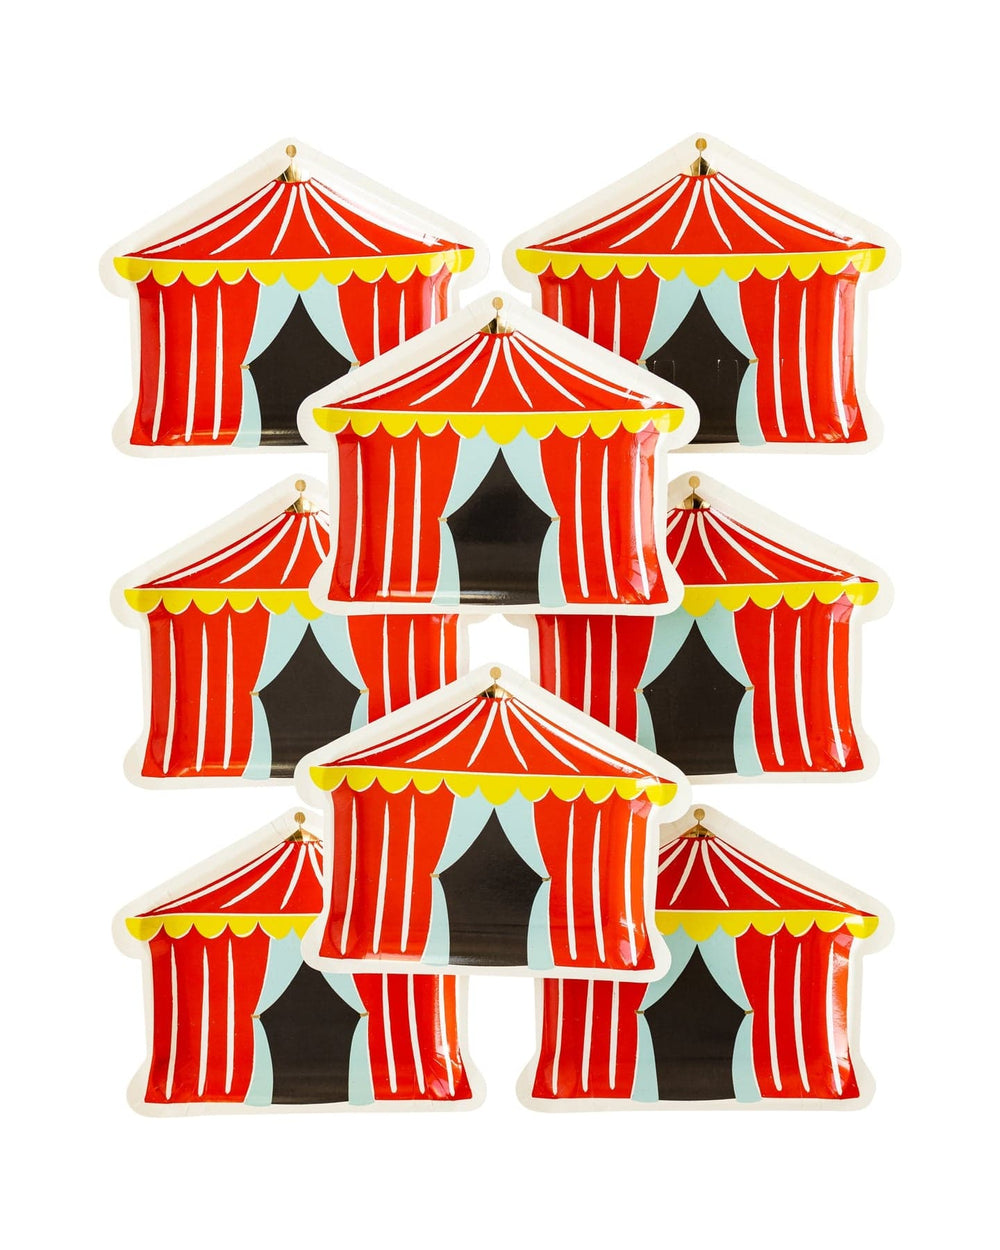 My Minds Eye - Carnival Party Tent Shaped Party Plates x 8 Disposable Plates Carnival Party Tent Shaped Party Plates x 8